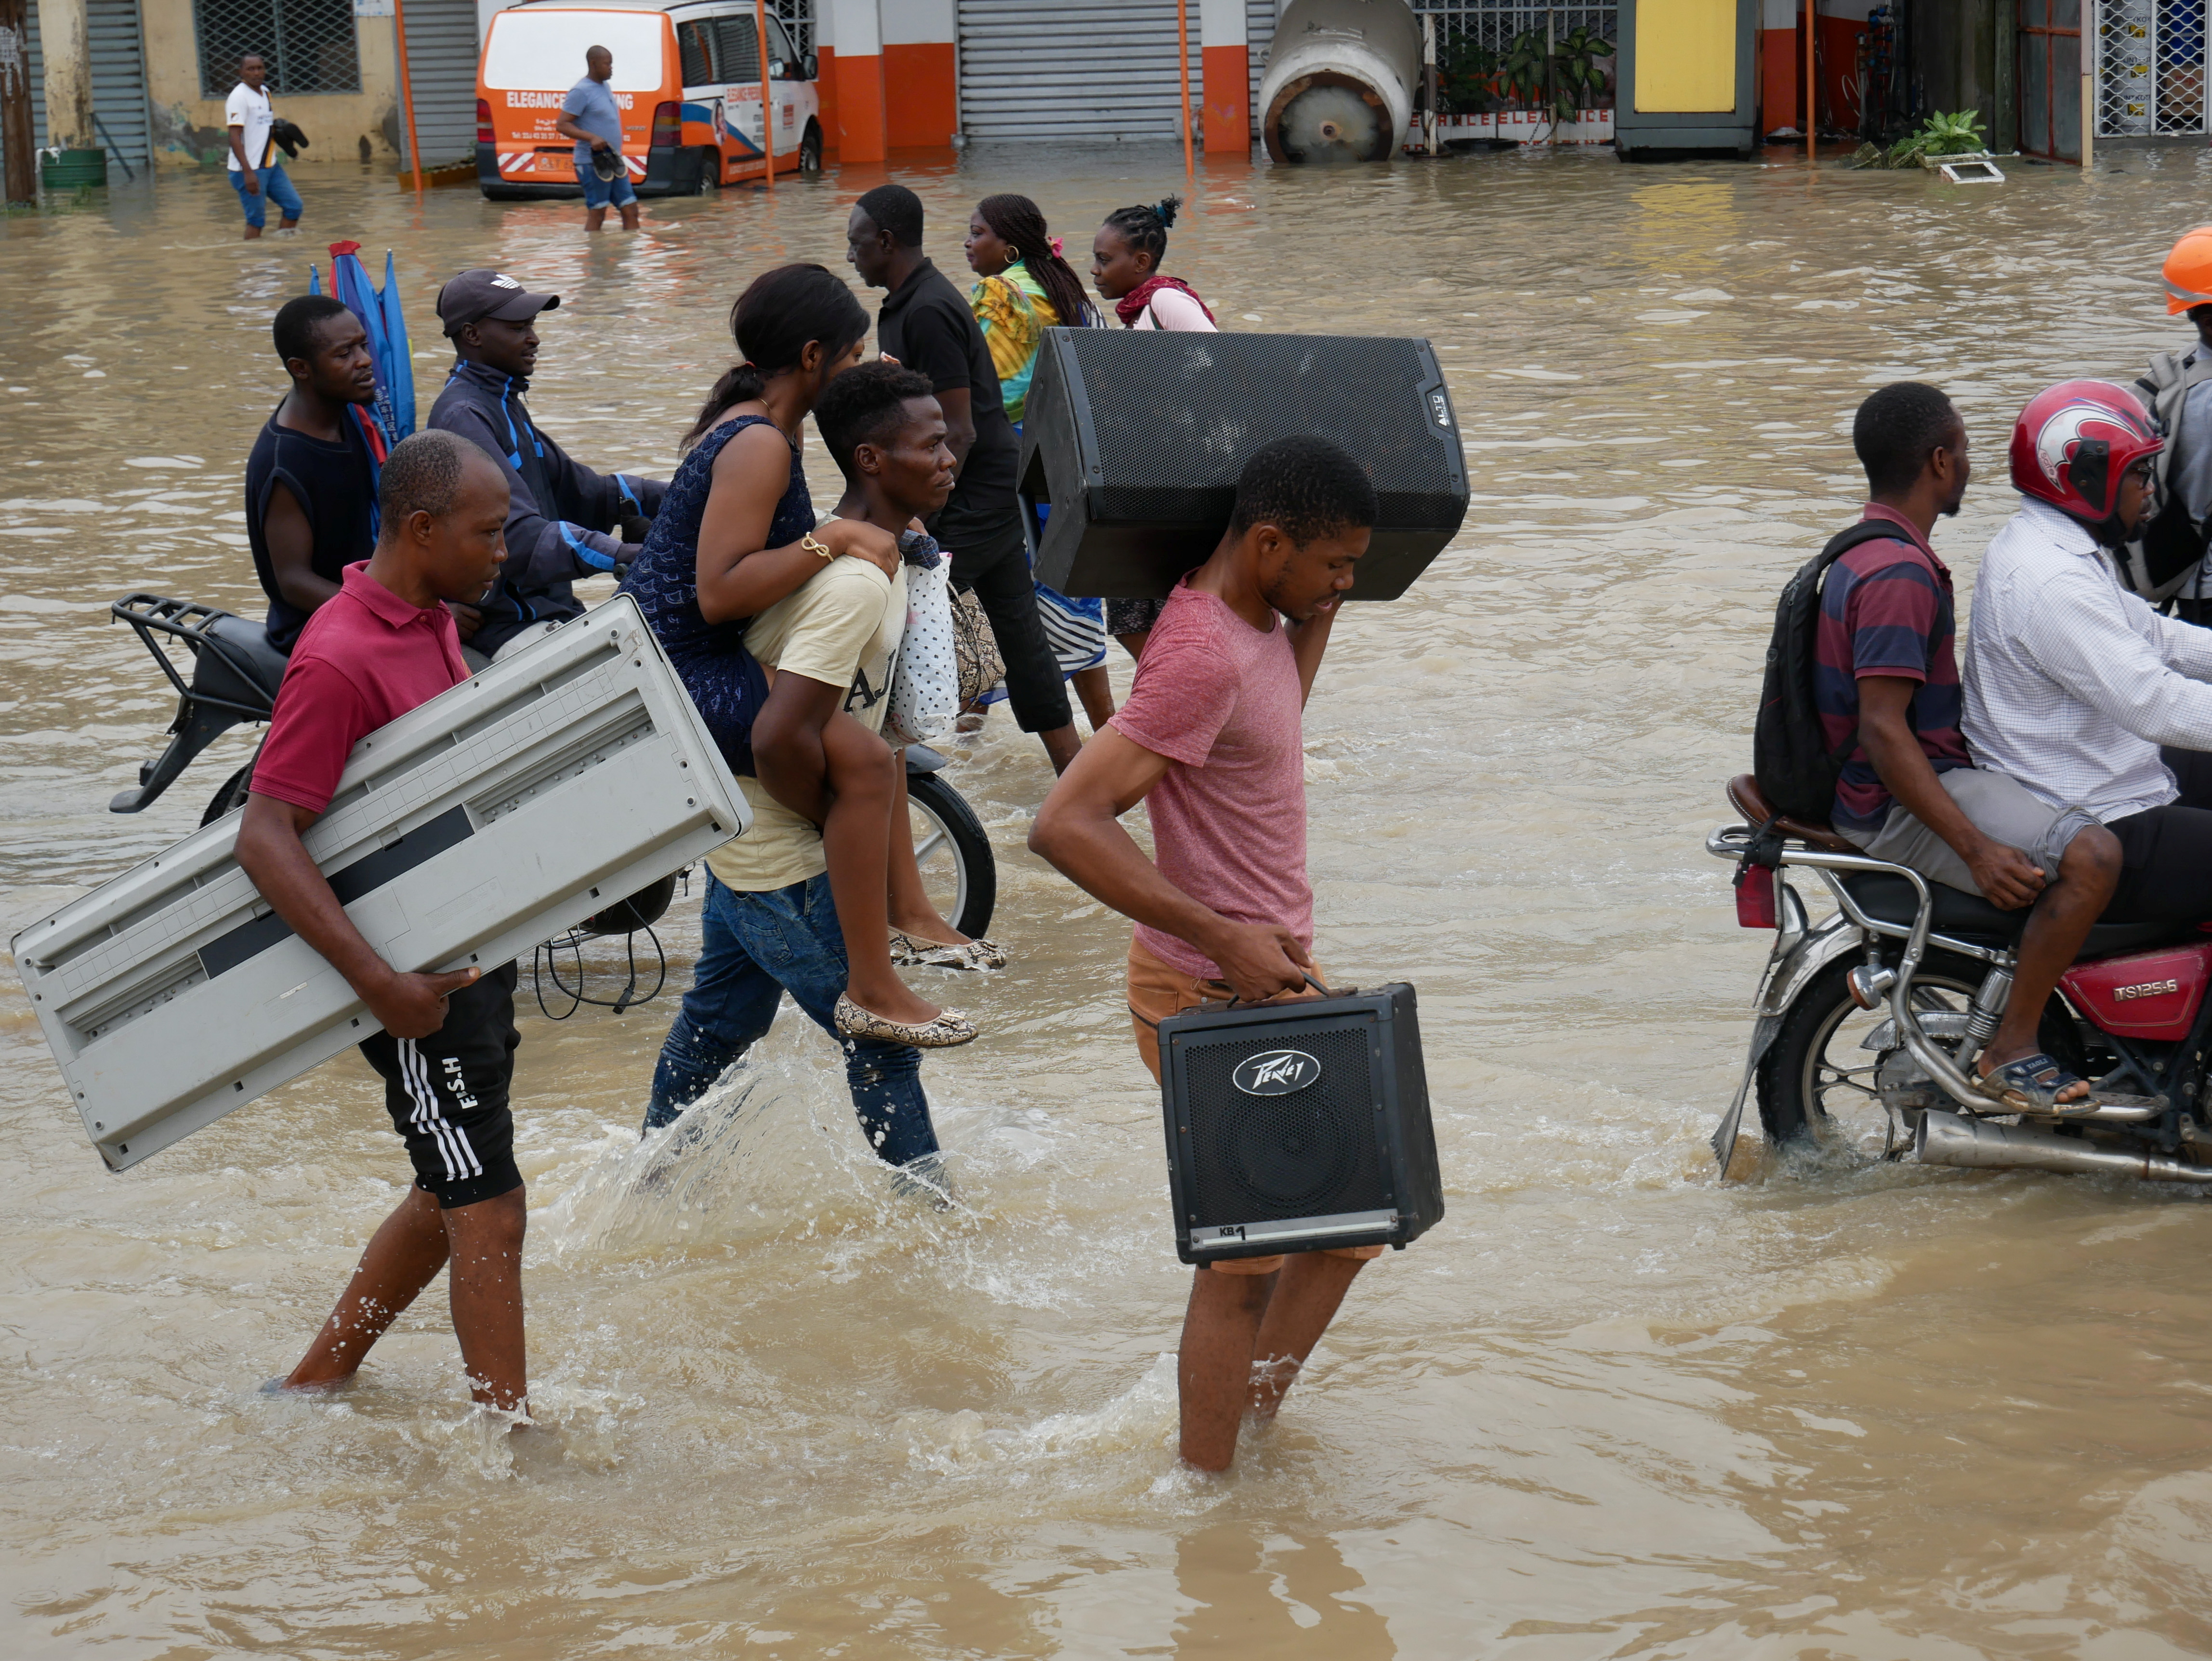 Residents make their way through a flooded street after the heavy rains in Douala